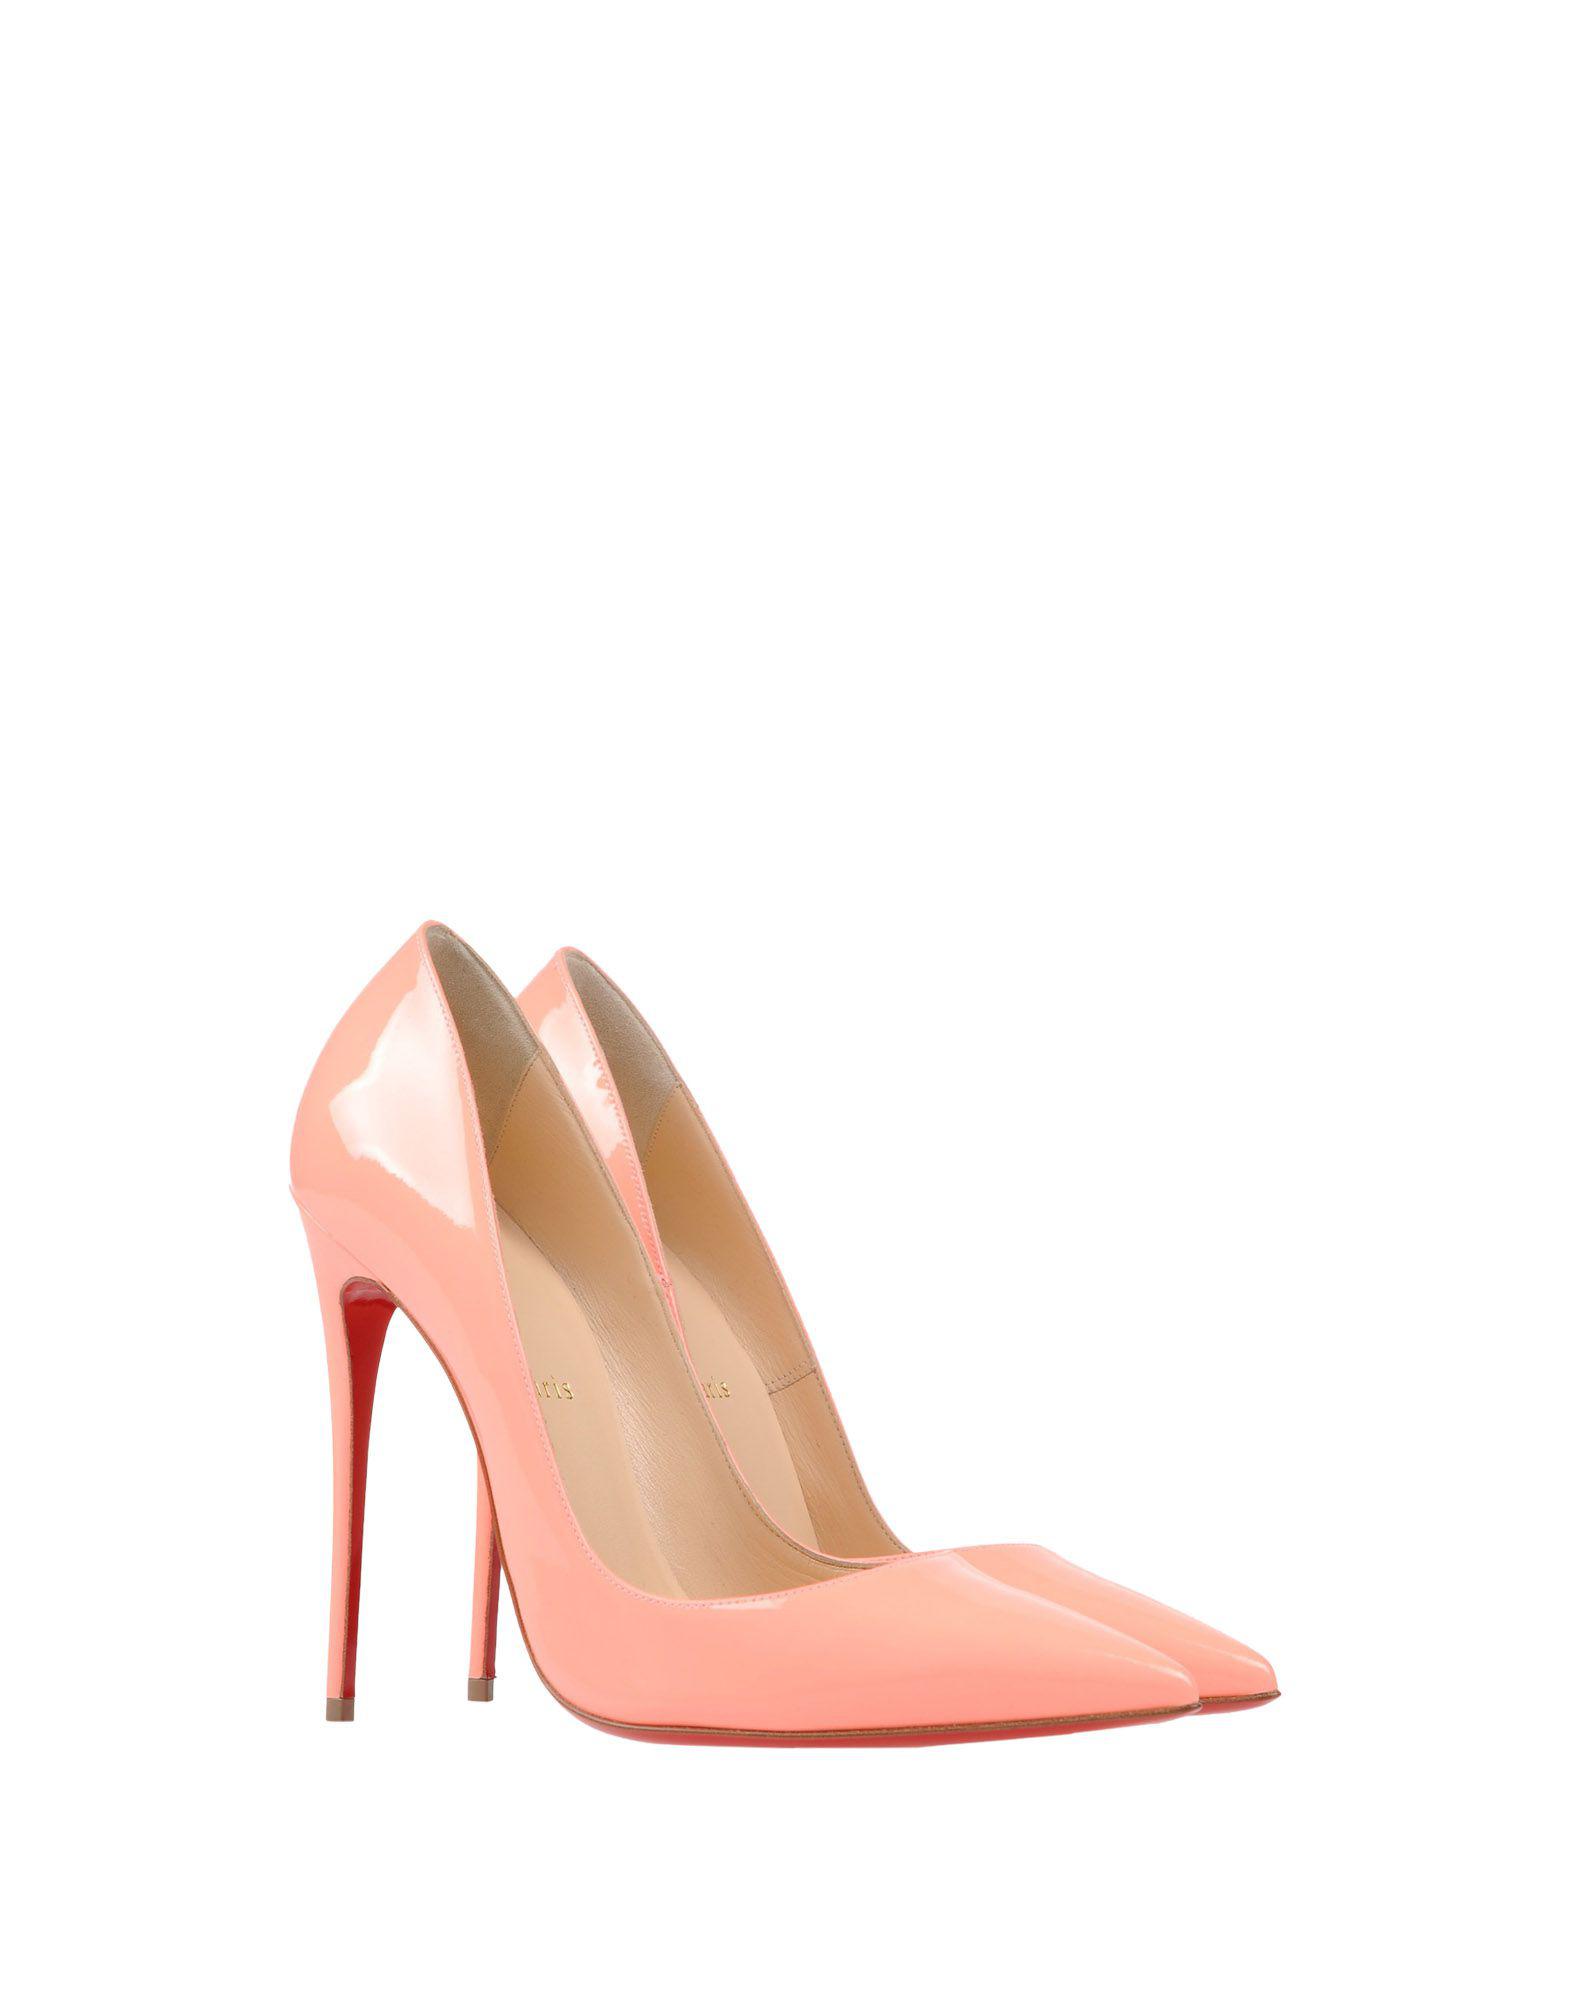 Christian Louboutin Leather Pump in 